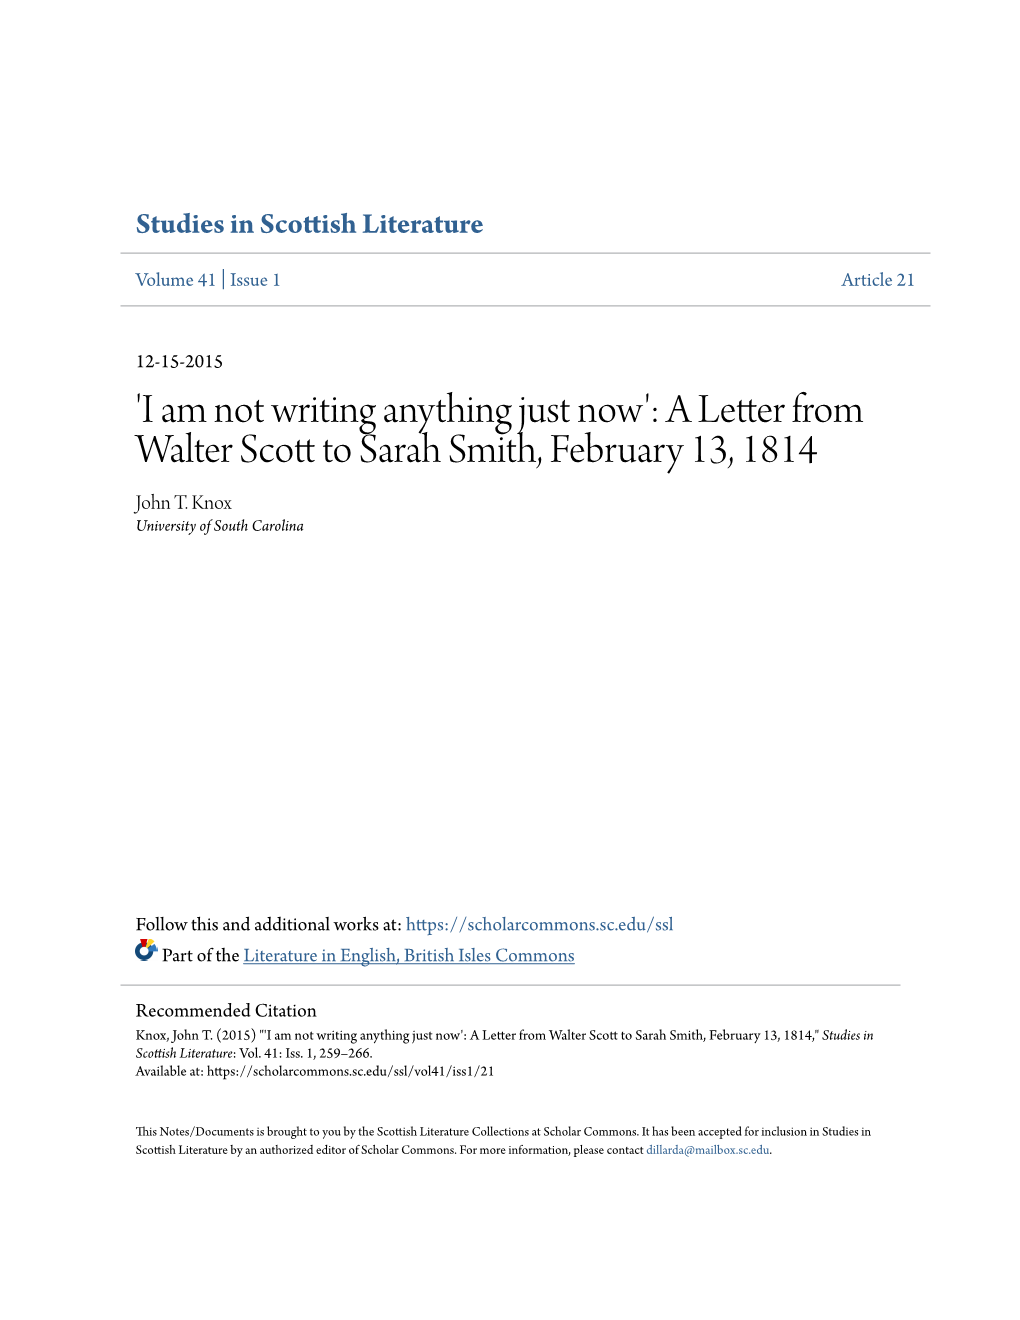 'I Am Not Writing Anything Just Now': a Letter from Walter Scott to Sarah